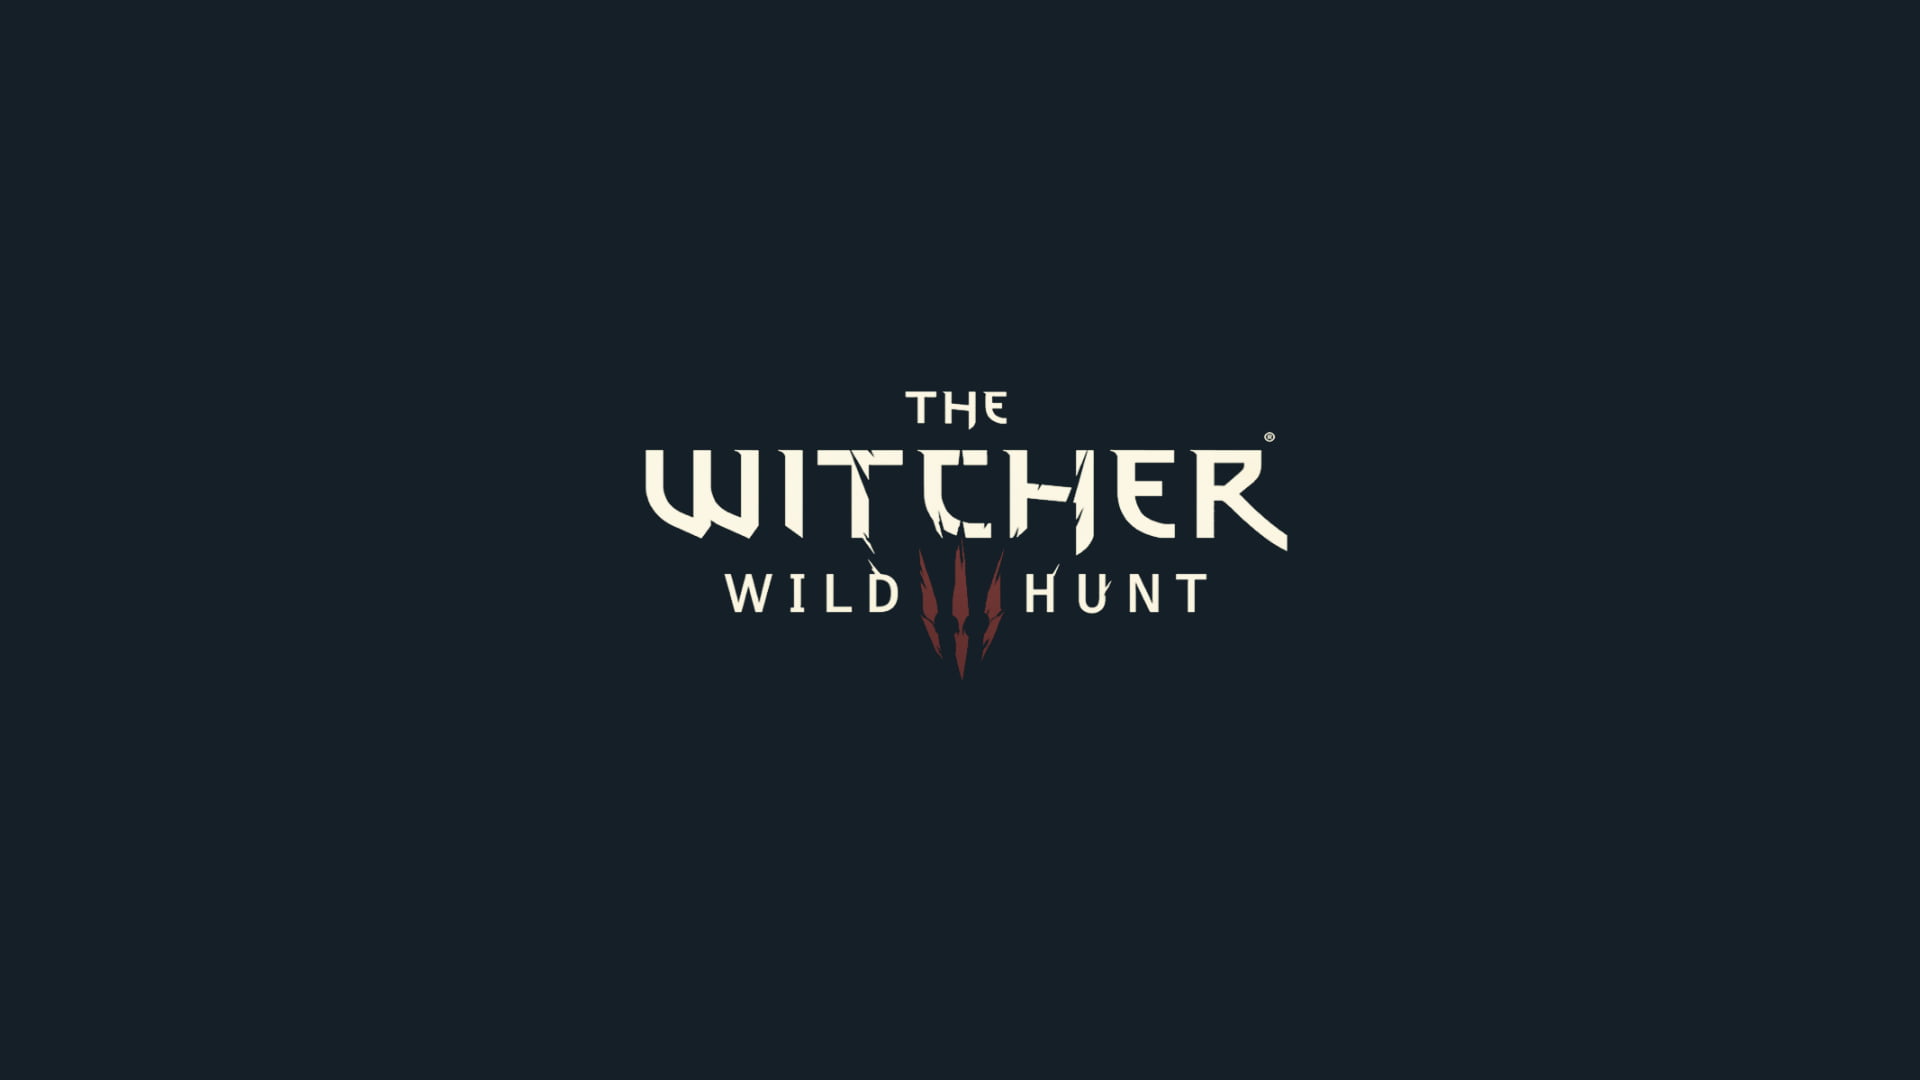 The Witcher Wild Hunt poster, The Witcher 3: Wild Hunt, The Witcher, logo, minimalism